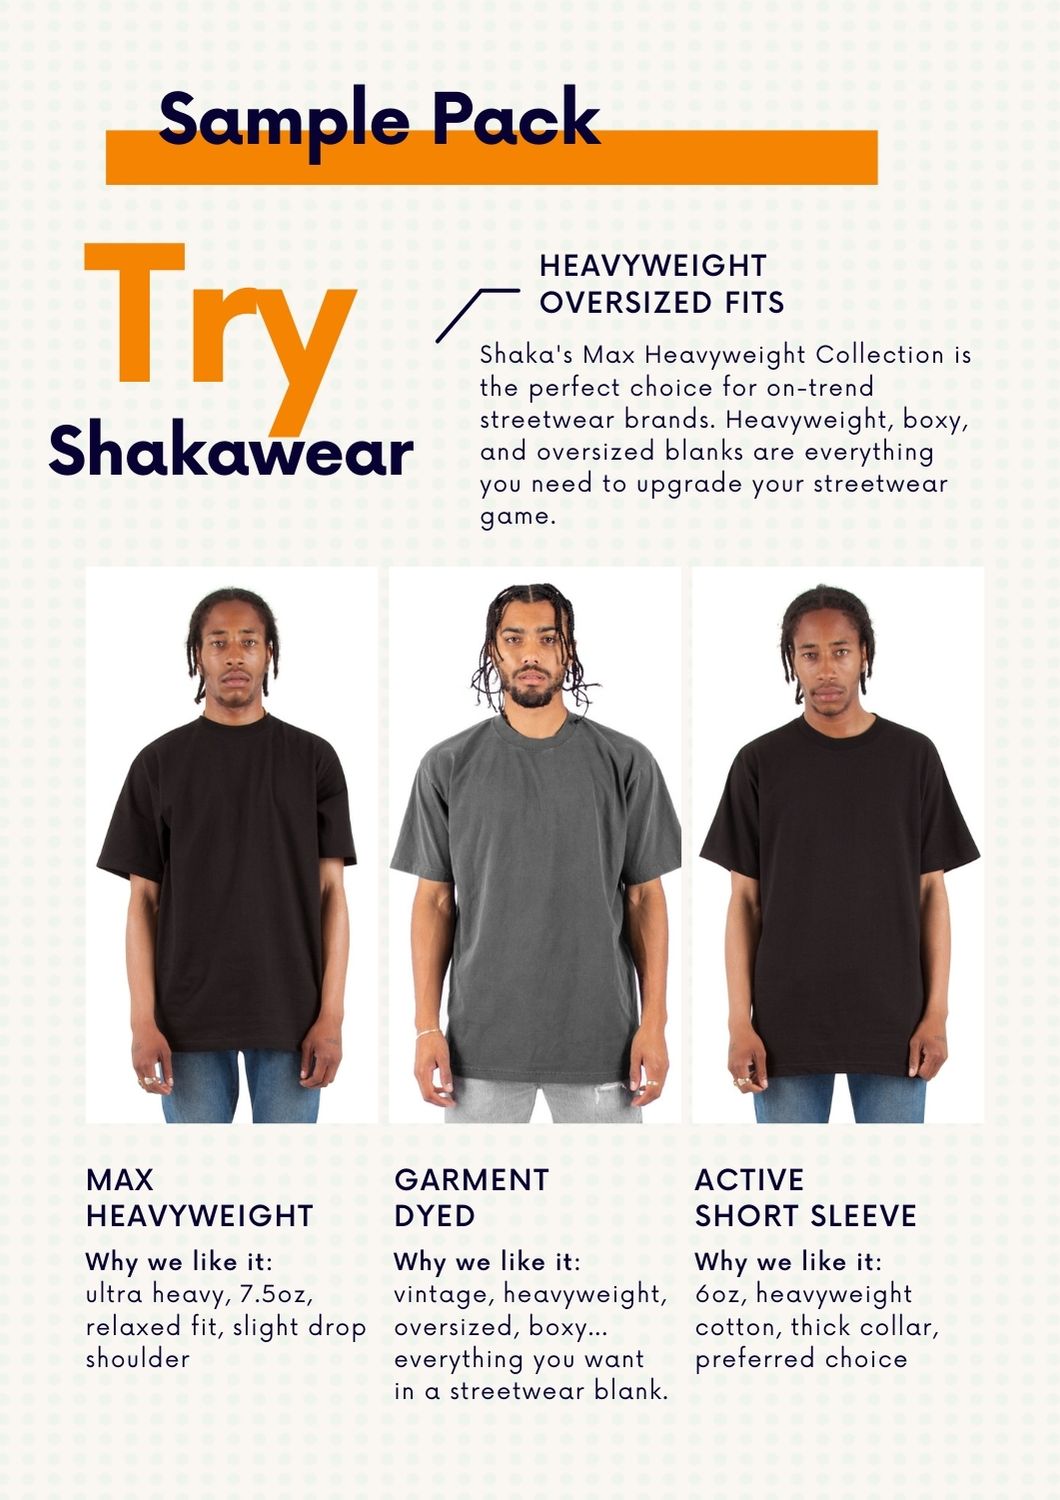 Promotional material showcasing three styles of Bella & Canvas heavyweight t-shirts with descriptions highlighting their unique features for streetwear fashion.